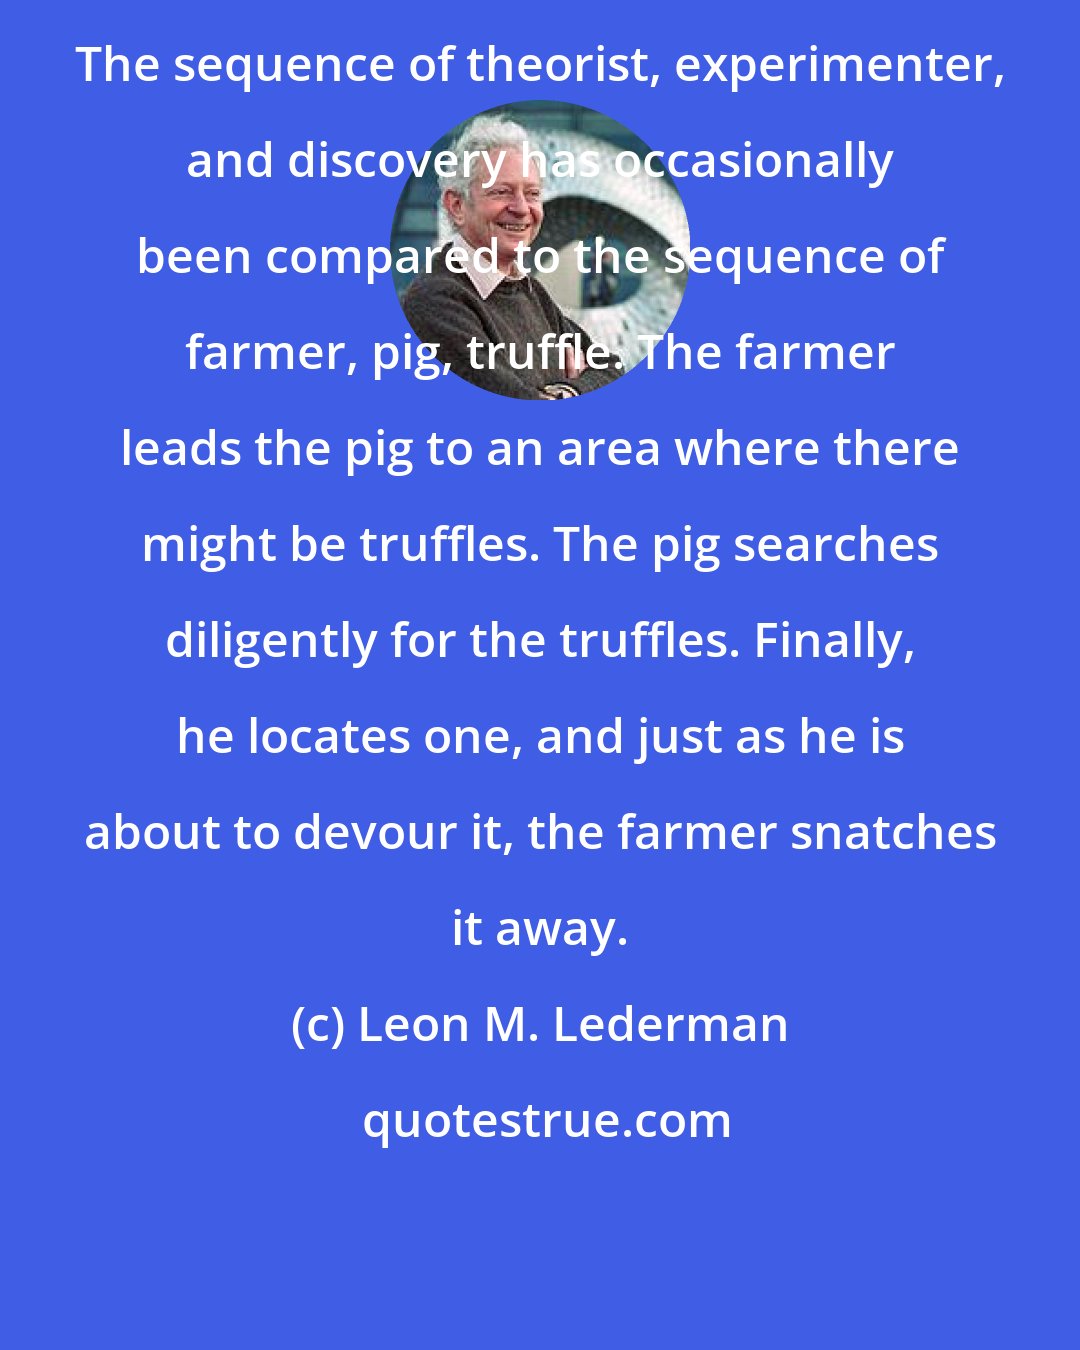 Leon M. Lederman: The sequence of theorist, experimenter, and discovery has occasionally been compared to the sequence of farmer, pig, truffle. The farmer leads the pig to an area where there might be truffles. The pig searches diligently for the truffles. Finally, he locates one, and just as he is about to devour it, the farmer snatches it away.